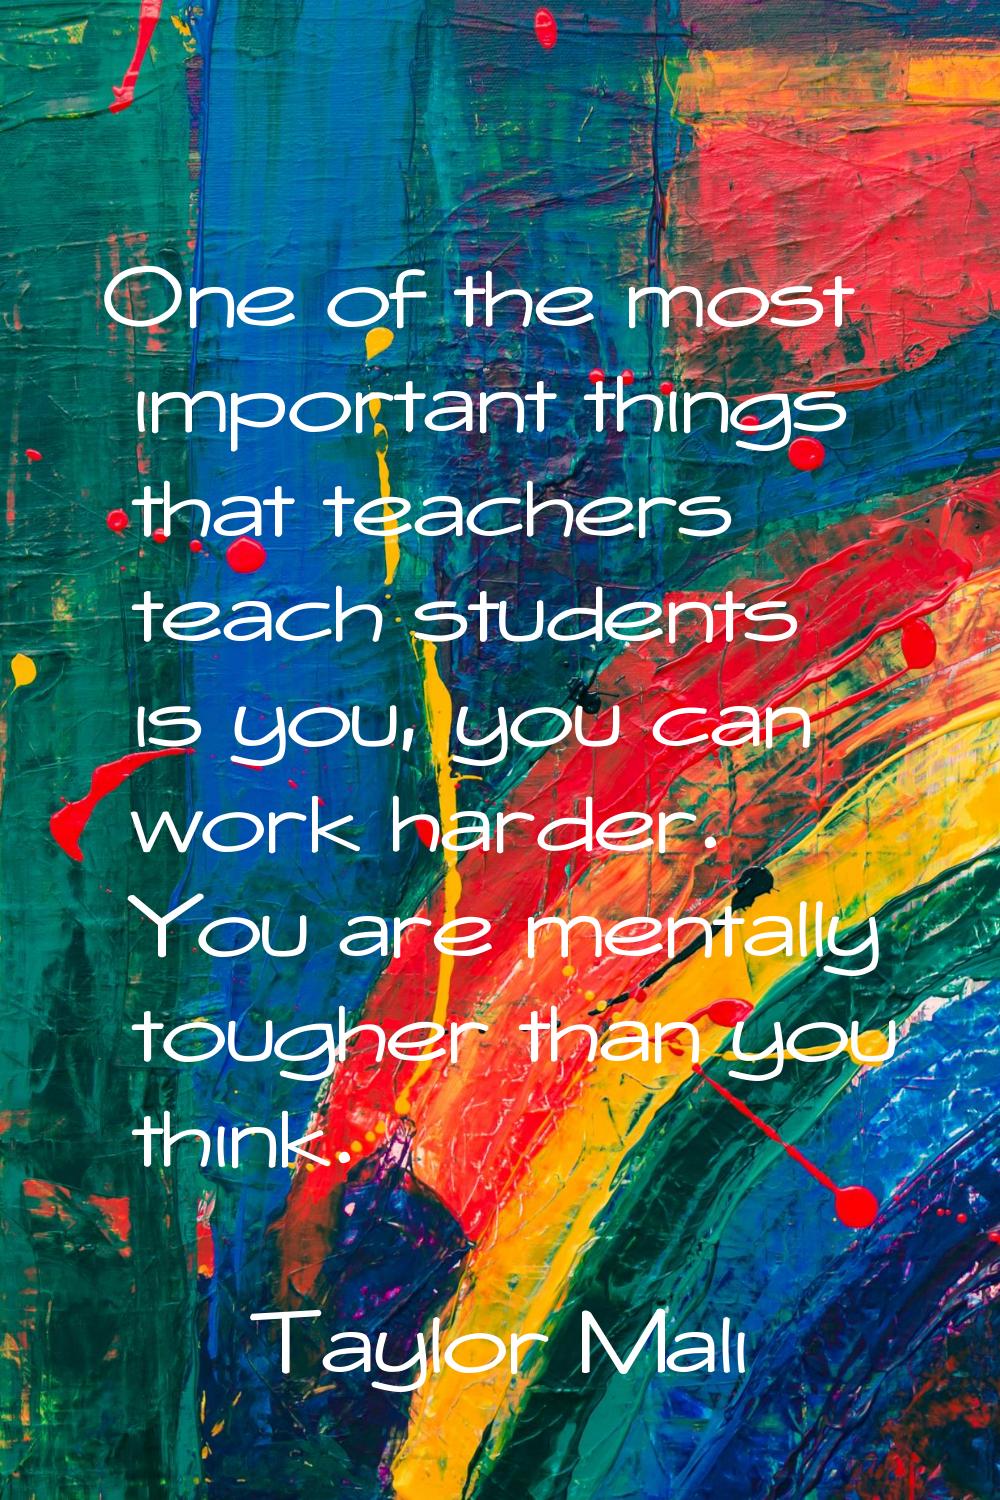 One of the most important things that teachers teach students is you, you can work harder. You are 